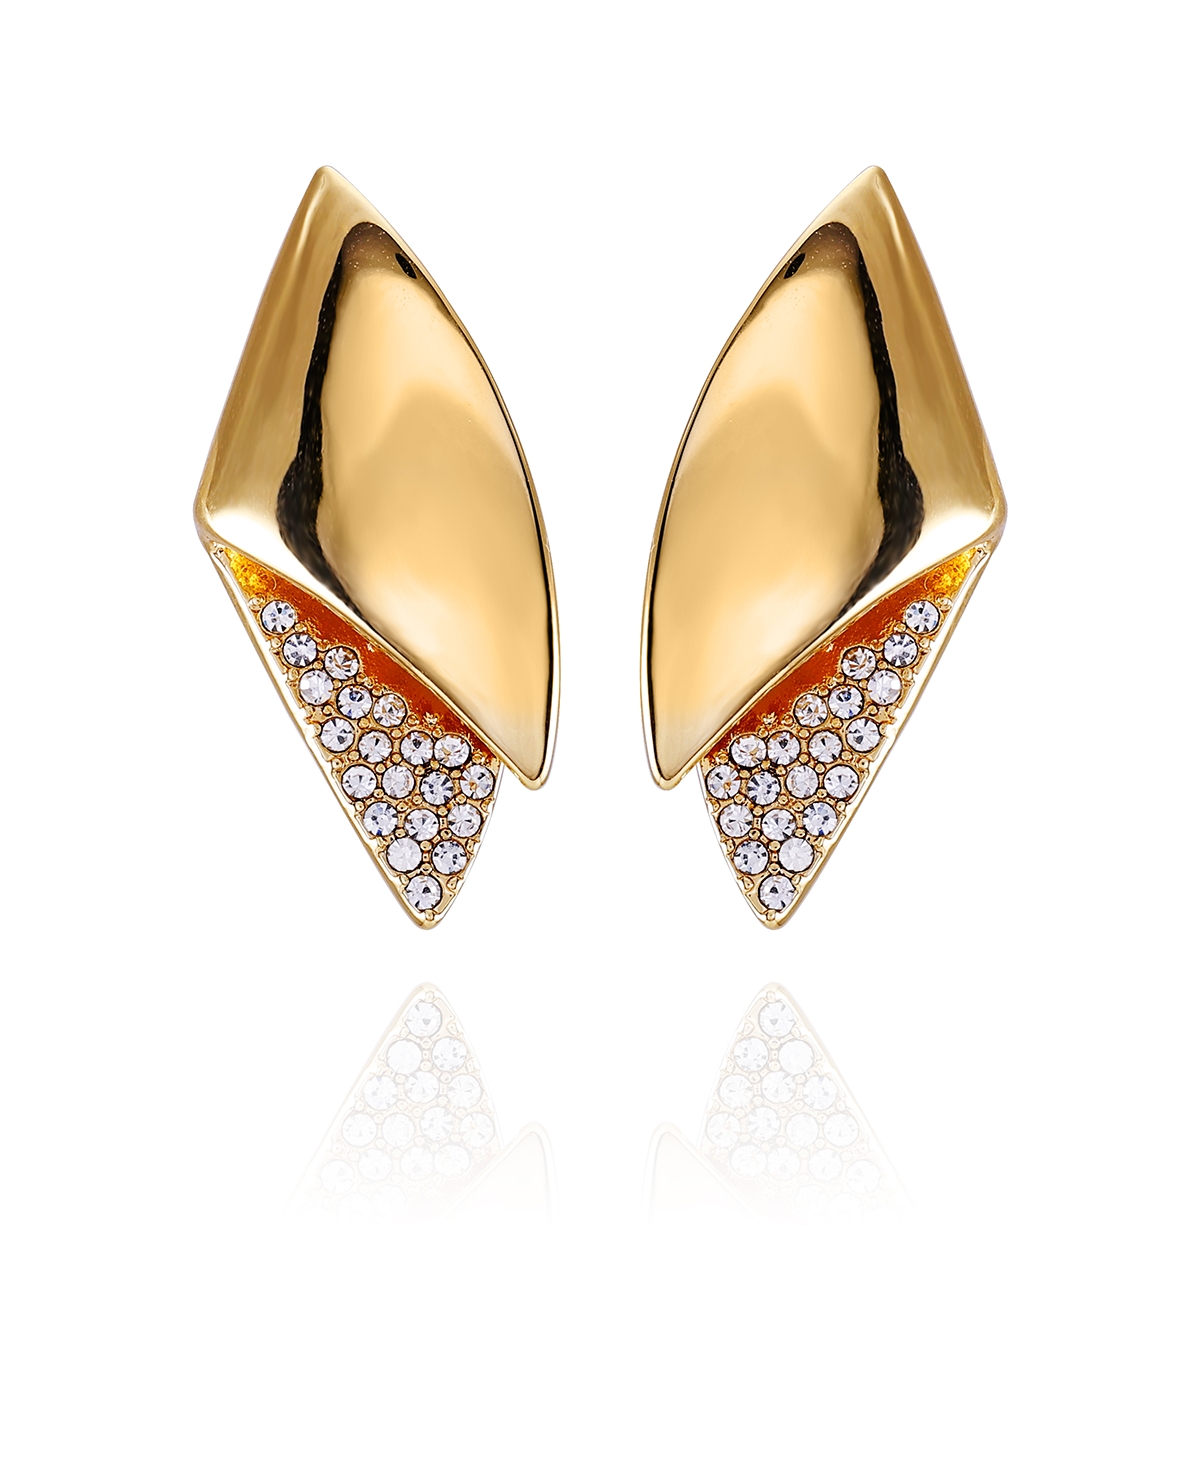 Gold-Tone Stud Statement Earrings - Gold